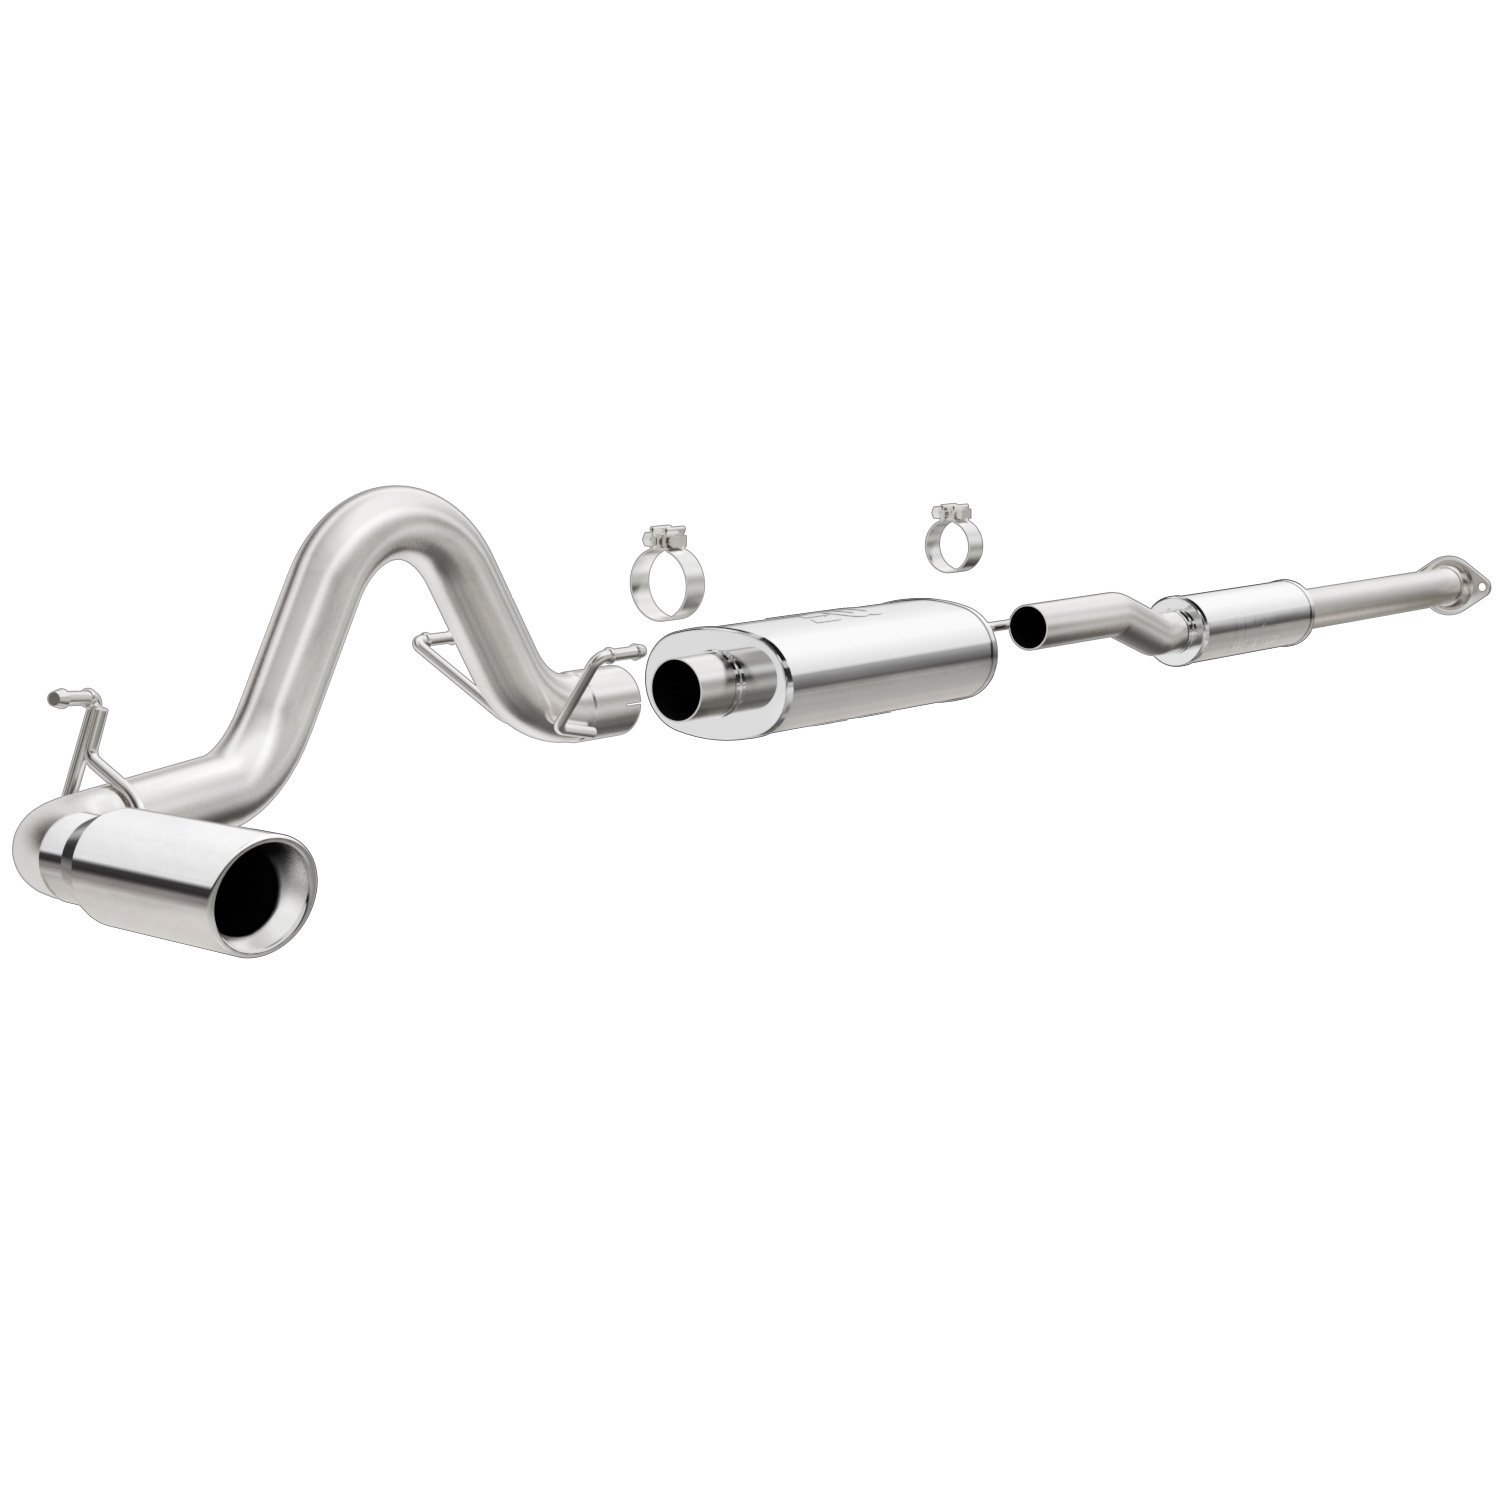 MF Series Cat-Back Exhaust System 2013-15 Tacoma 4.0L